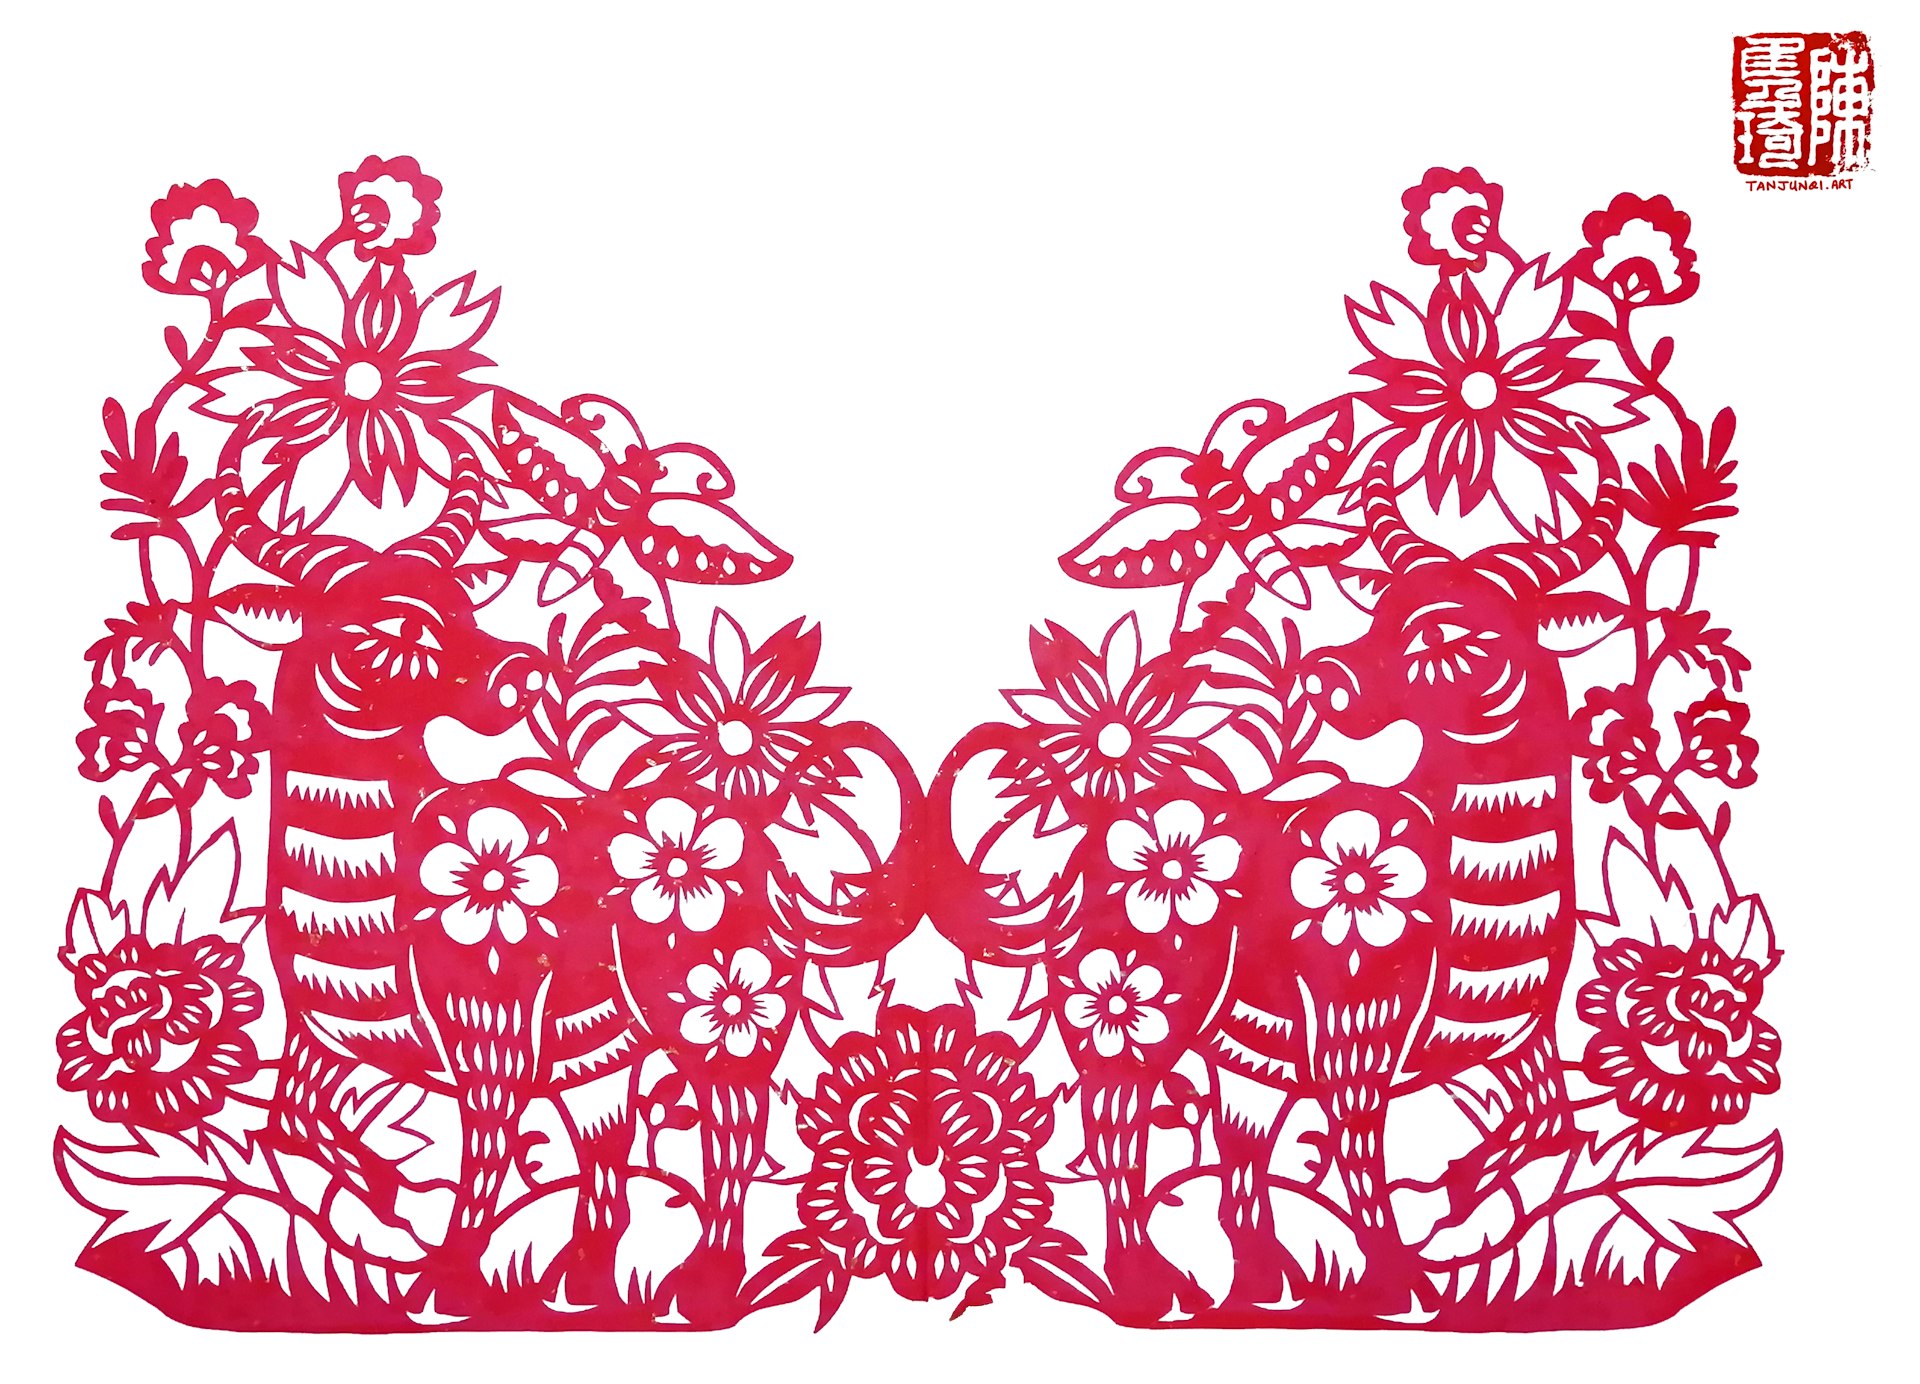 Symmetrical Chinese papercut of two bulls standing amidst blooming flowers observing butterflies in flight